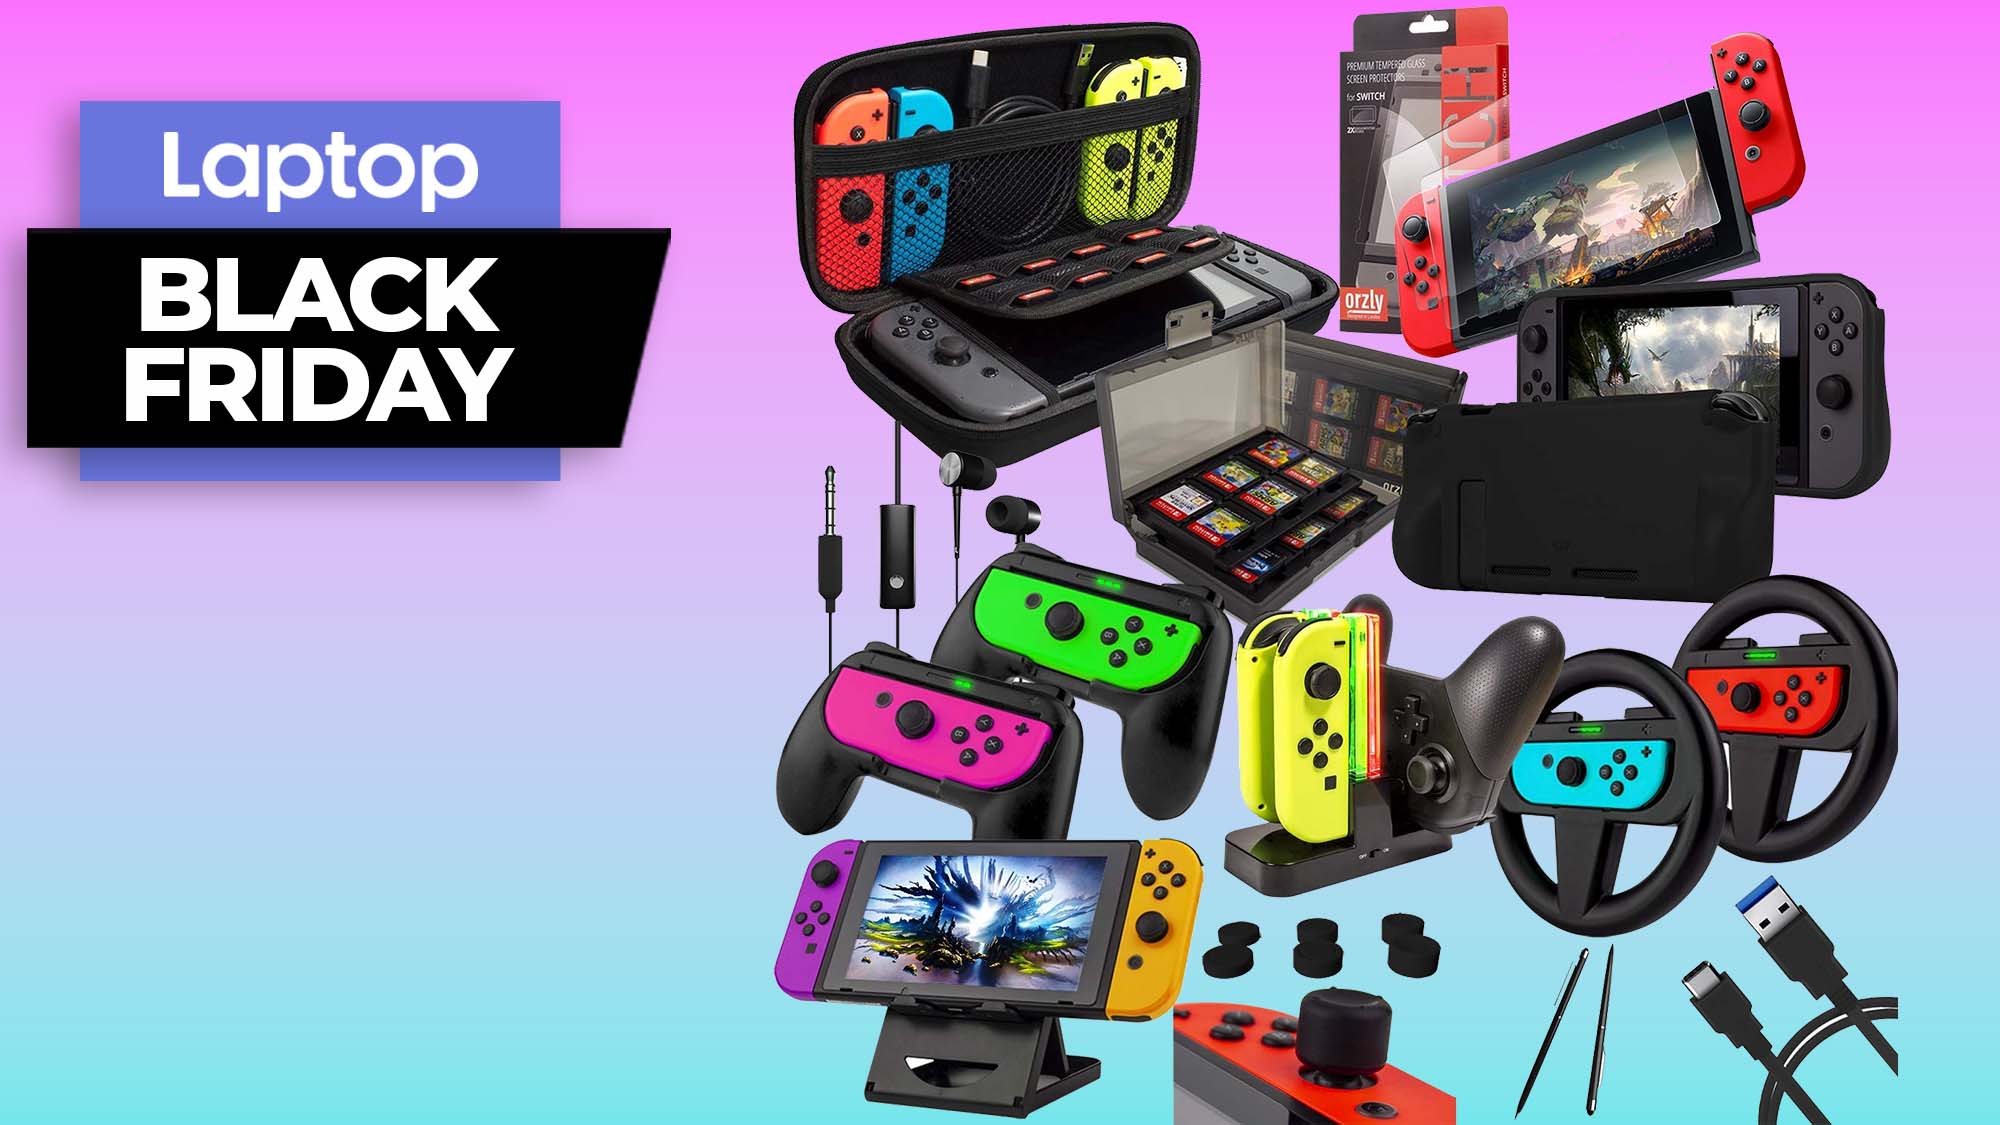 Orzly Nintendo Switch Acessory Bundle arranged on a gradient background with a Black Friday banner in the upper left corner